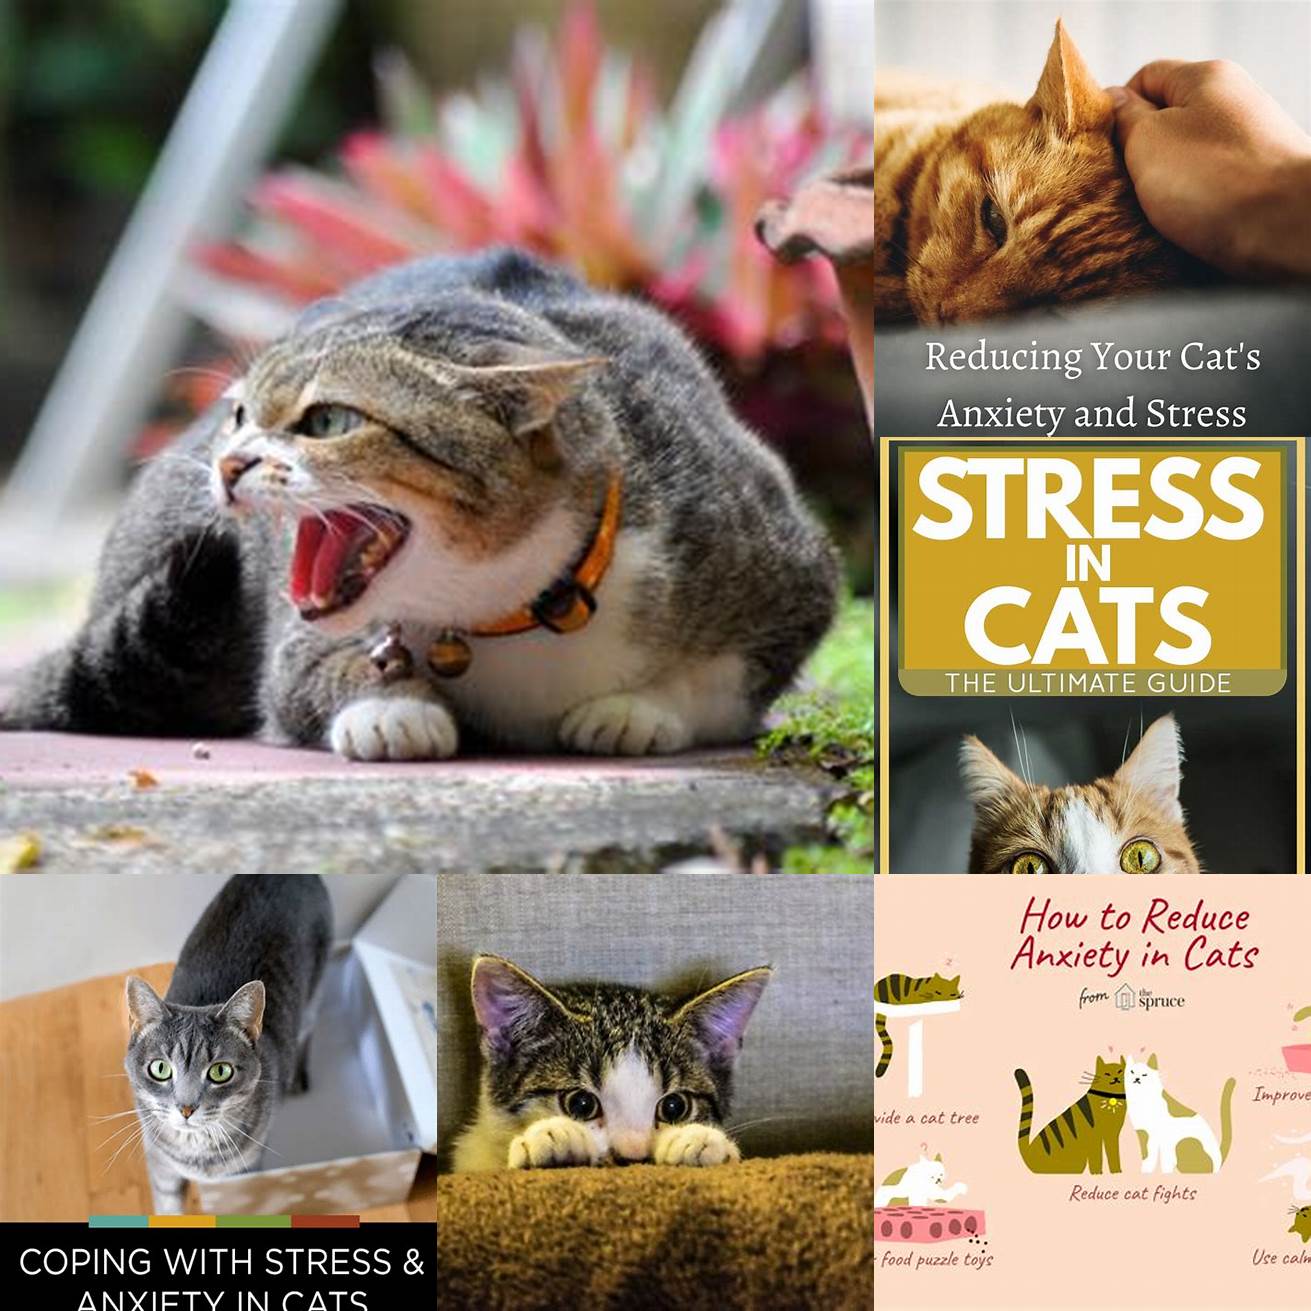 Stress or anxiety Cats may eat too quickly due to stress or anxiety such as changes in their environment or routine